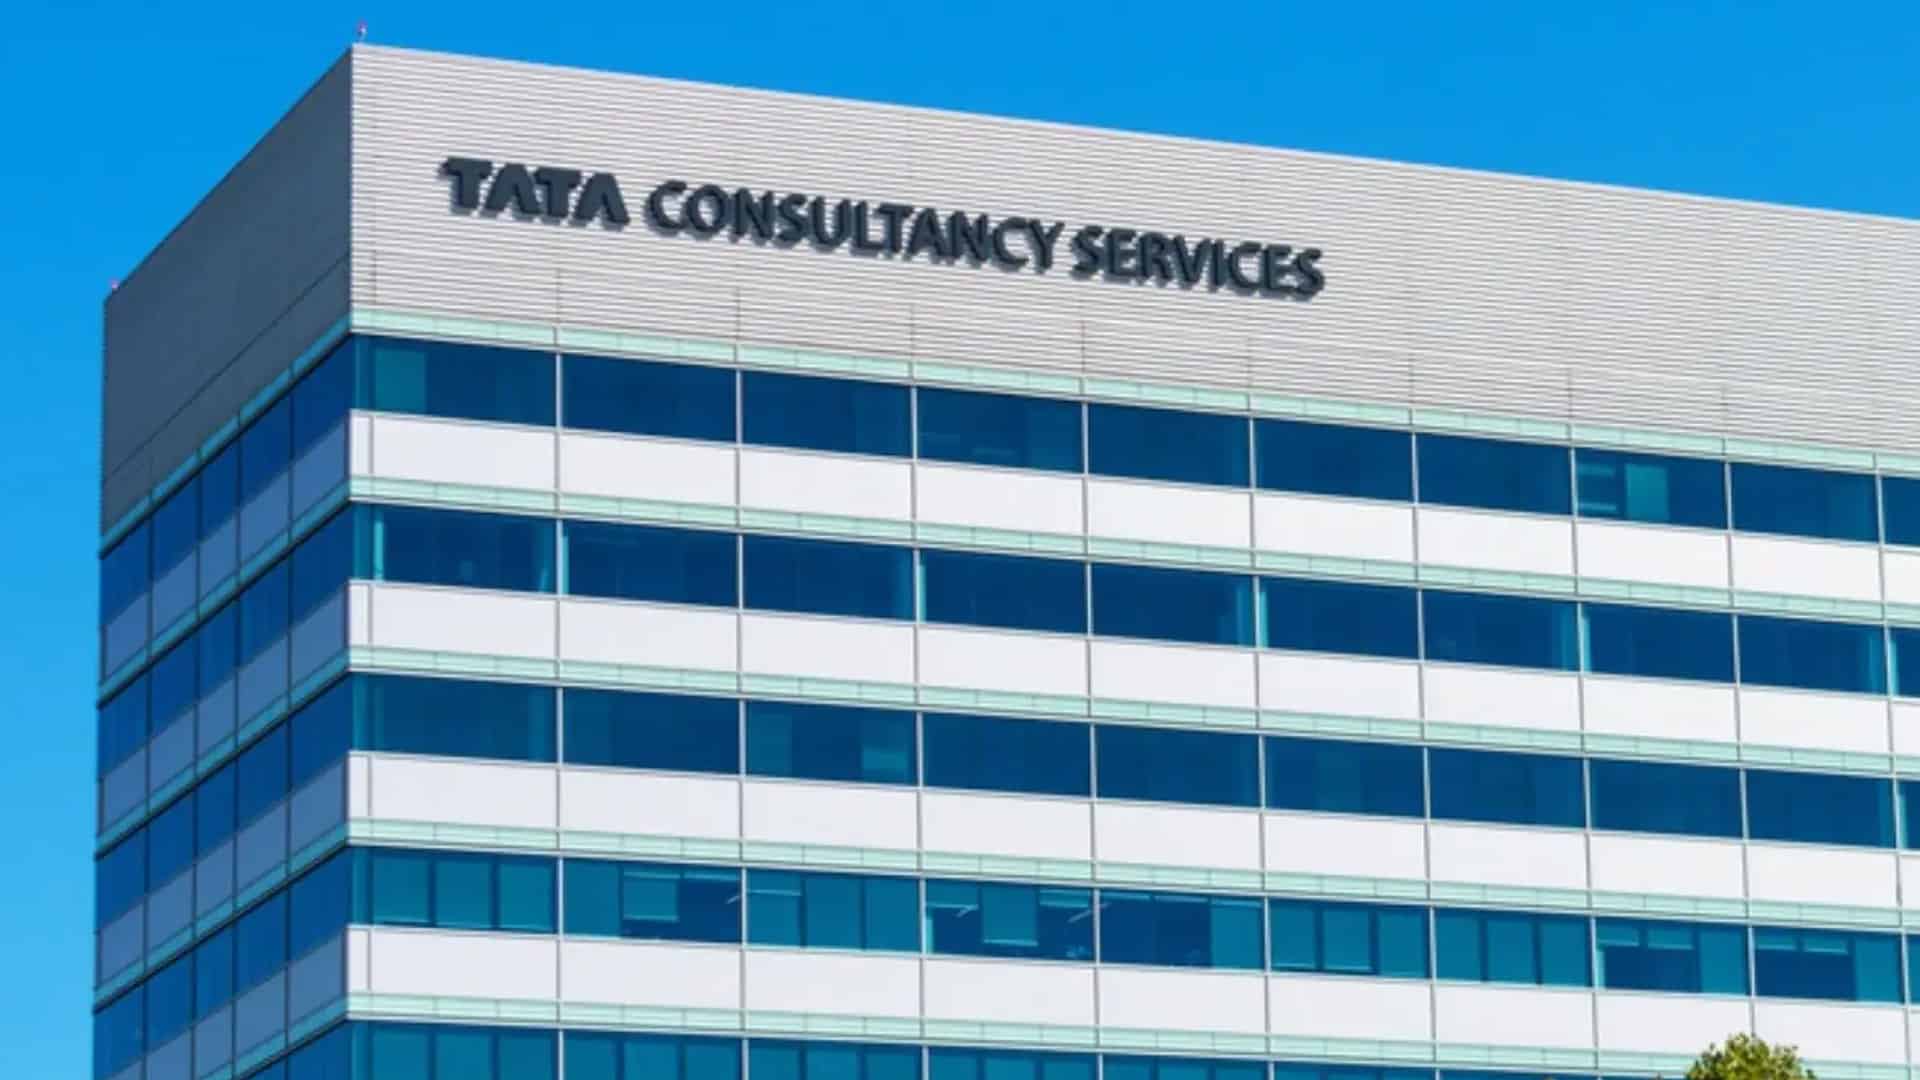 TCS signs deal with M&S; expects USD 1 bn retail sector biz in UK, Europe to outgrow Co revenues